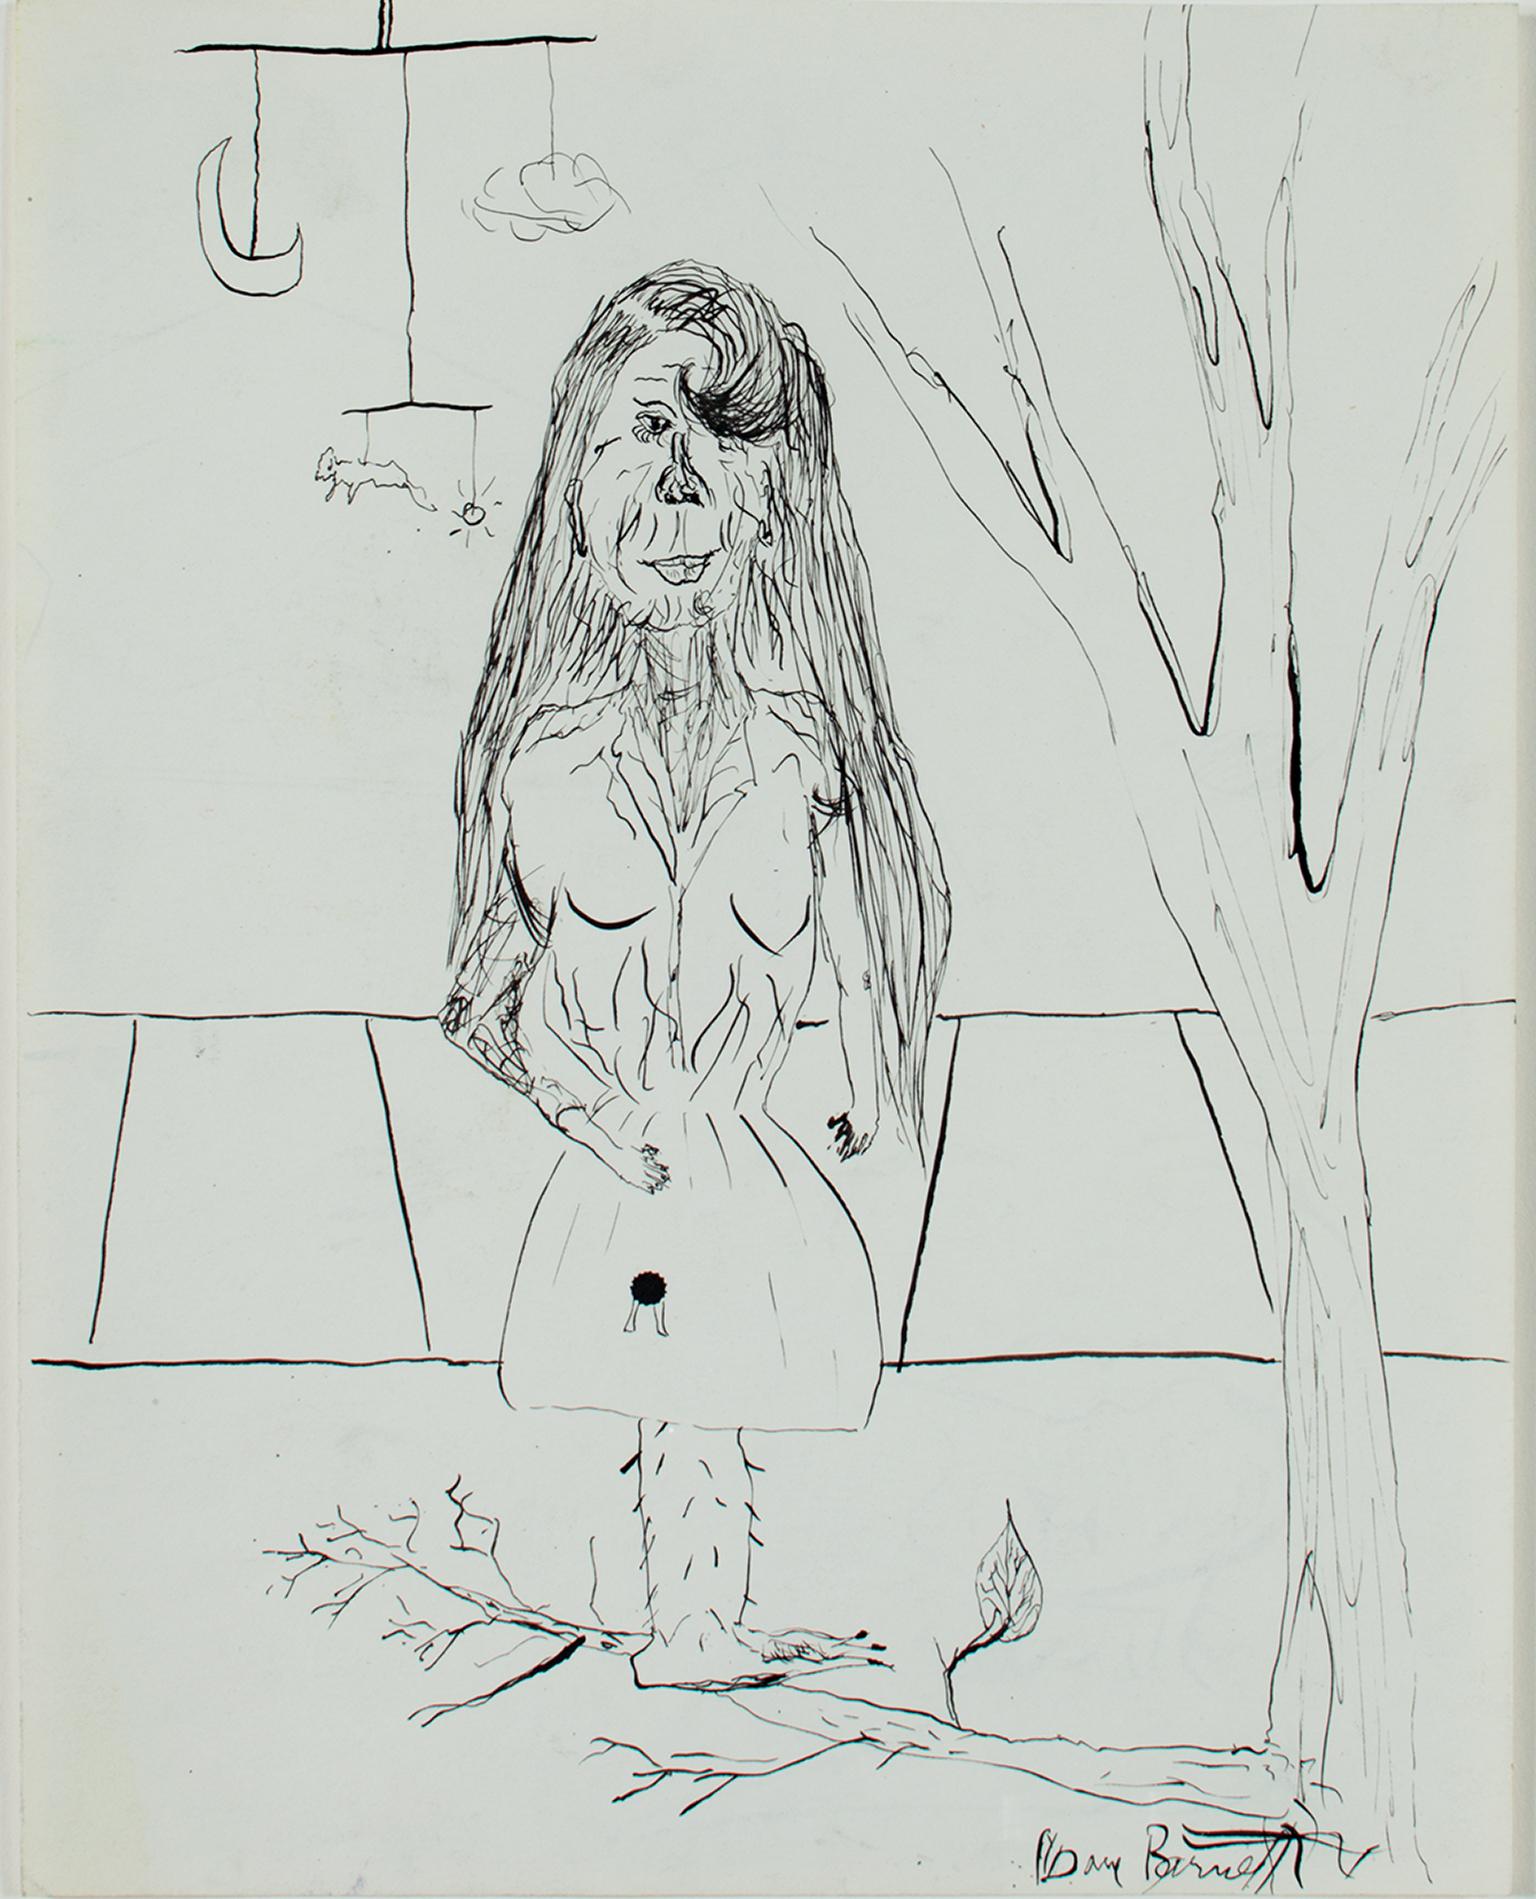 "Out on a Limb" is an original ink drawing with a second side, titled "Tortoise & the Hare," both by David Barnett. It is signed on the lower right verso. On the front side, a bearded lady stands on a tree branch in front of a sidewalk and a